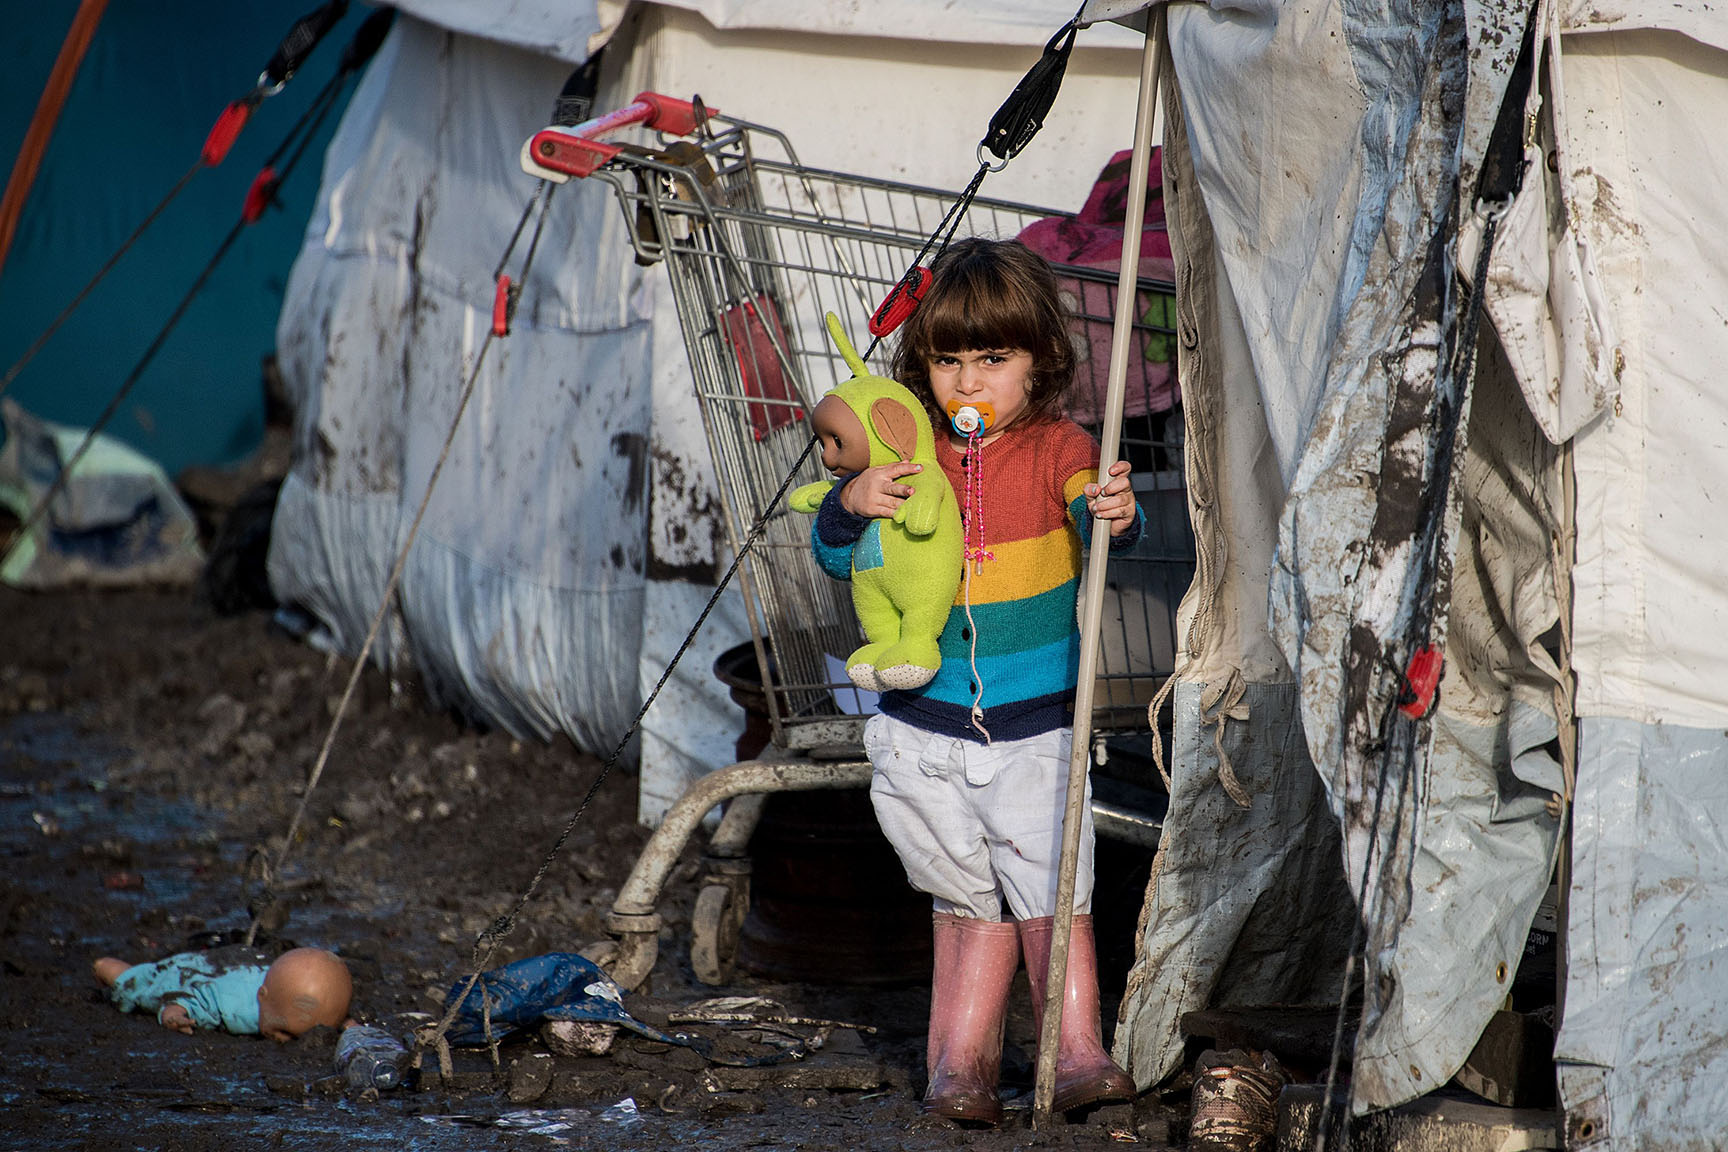 TOPSHOT - The child of Kurdish migrants stands outside a tent at the Grande Synthe migrant camp near Dunkerque in northern France on December 23, 2015. More than 2,000 migrants, mostly Iraqis and Kurds, live in the camp. The UN refugee agency and the International Organization for Migration (IOM) said this week more than one million migrants and refugees reached Europe this year, most of them by sea, more than four times the figure for 2014. / AFP / DENIS CHARLETDENIS CHARLET/AFP/Getty Images